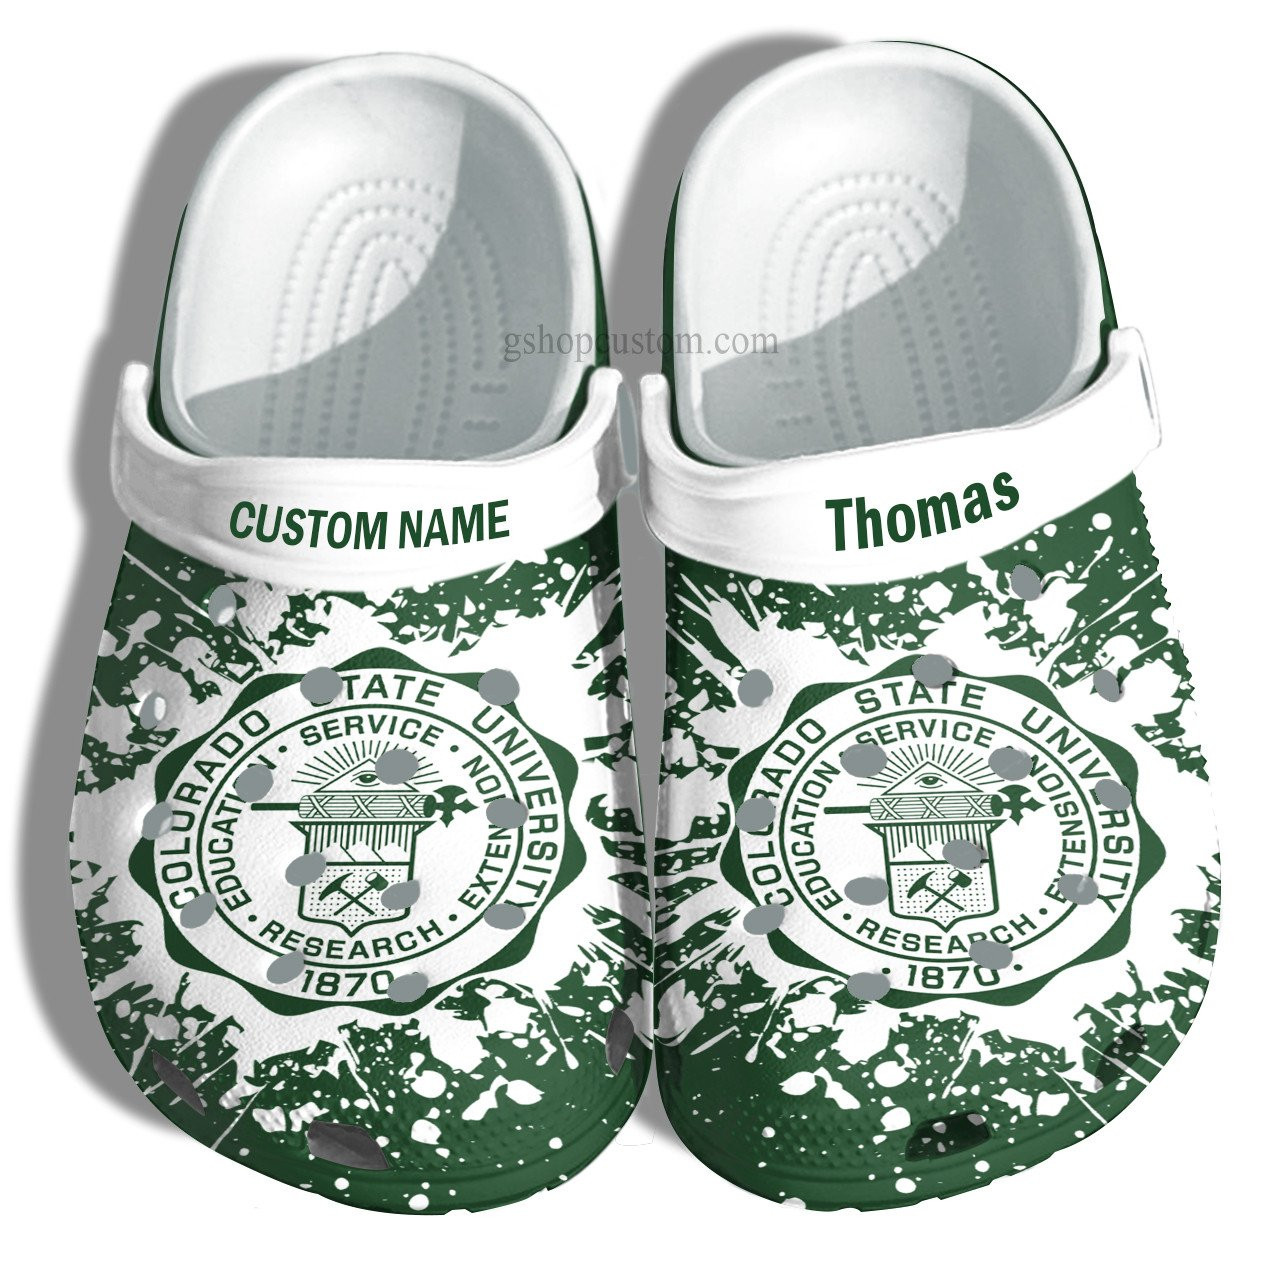 Colorado State University Graduation Gifts Croc Shoes Customize- Admission Gift Crocs Shoes